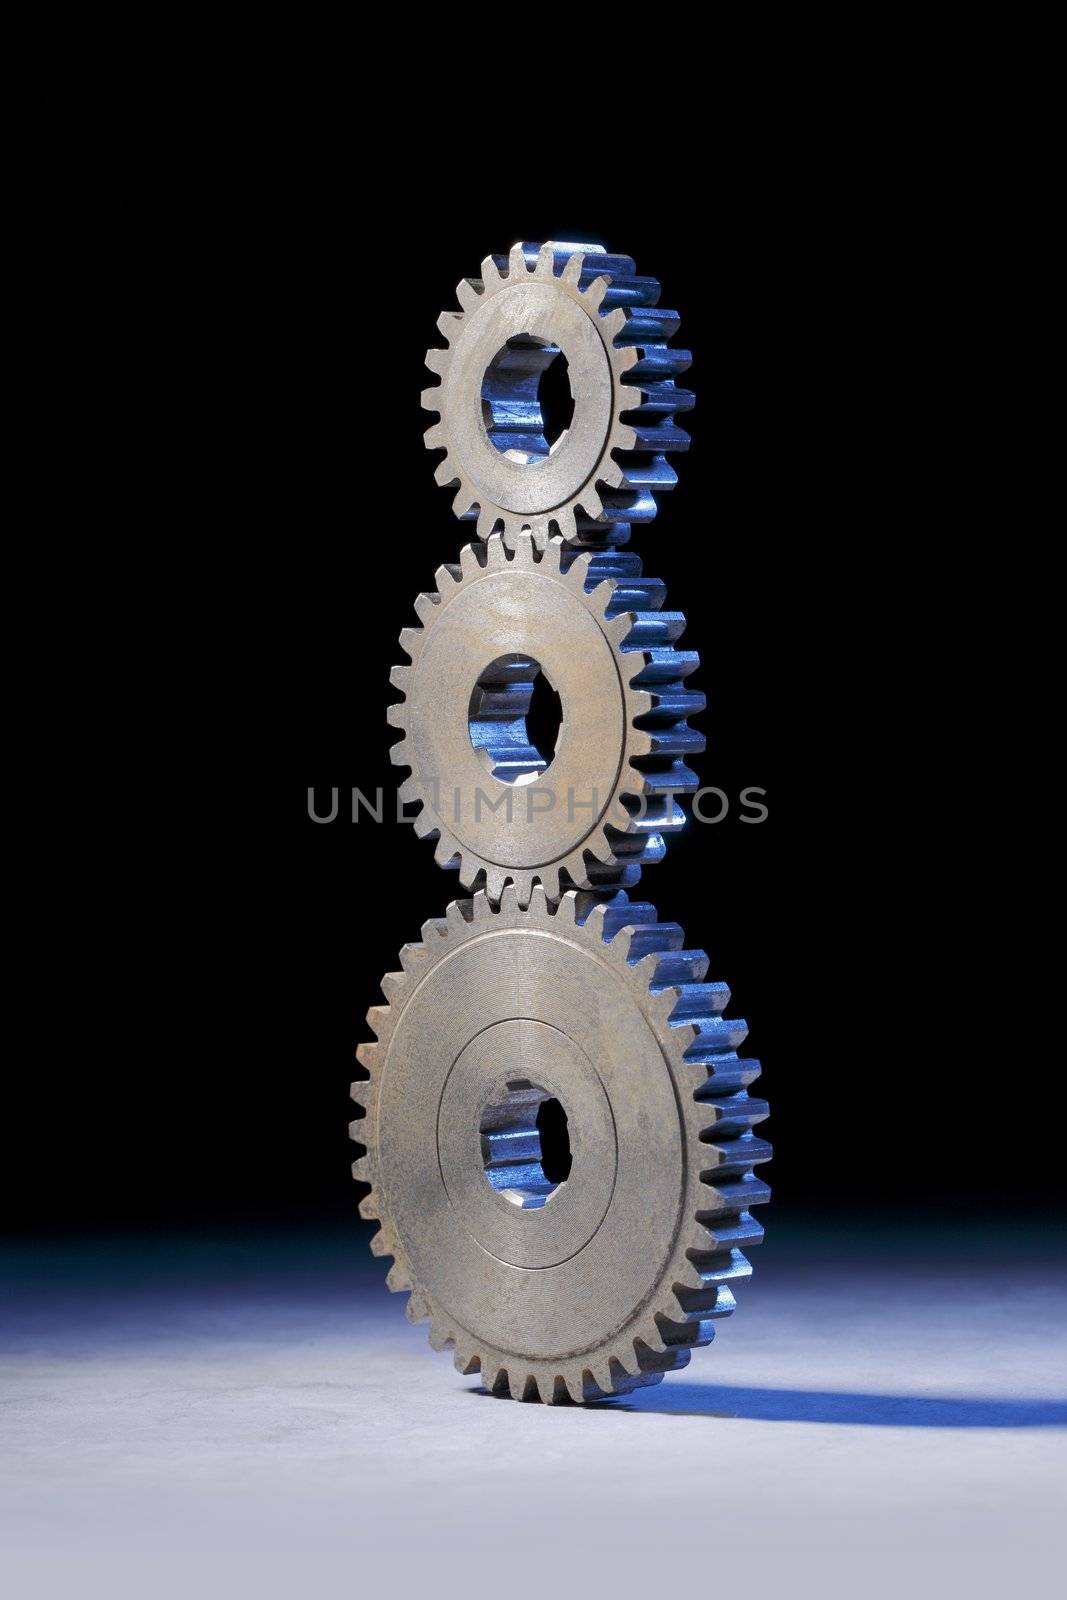 Still life with three cog gear wheels stacked on eachother.